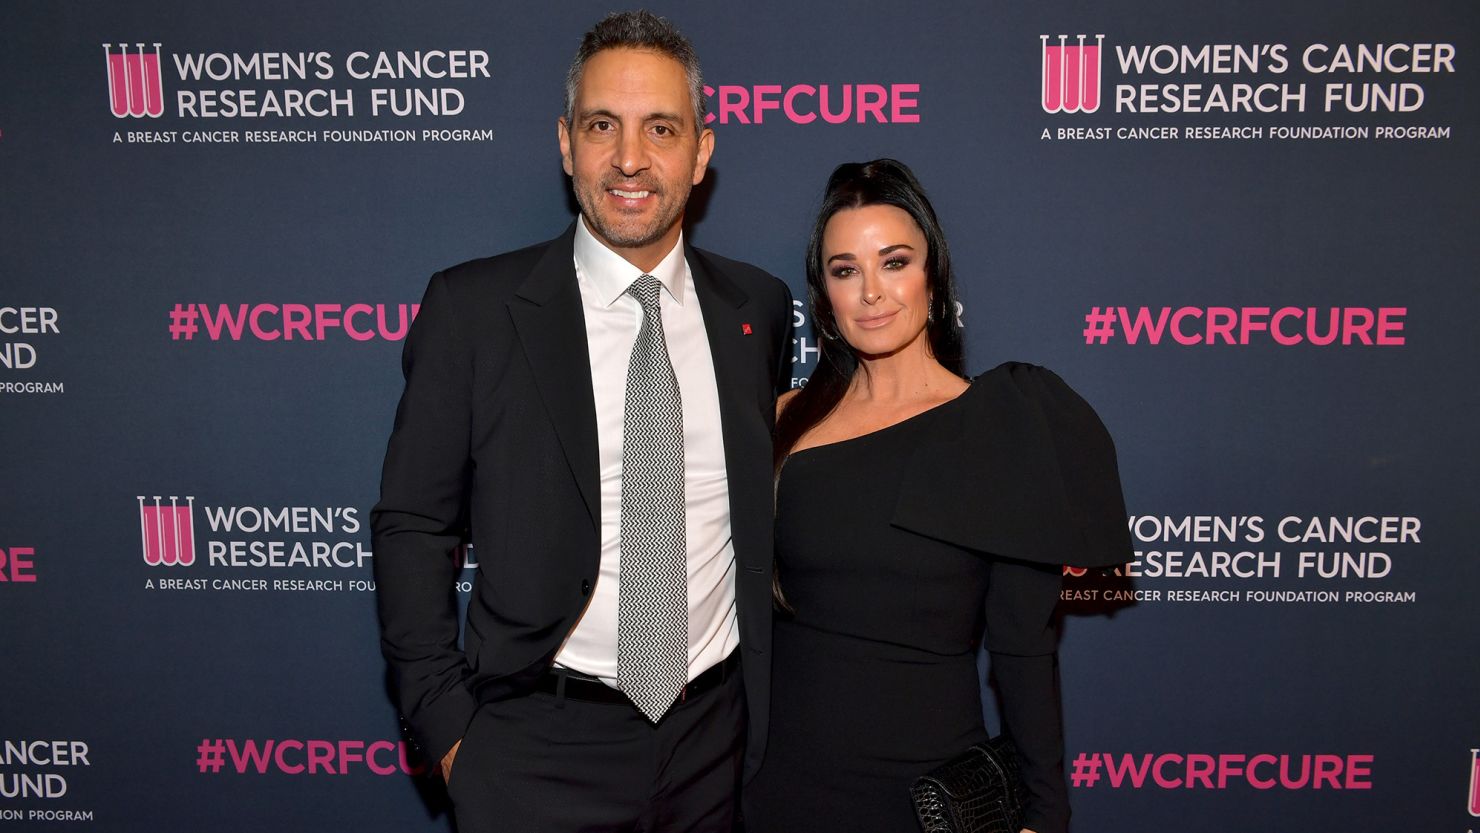 BEVERLY HILLS, CALIFORNIA - FEBRUARY 27: (L-R) Mauricio Umansky and Kyle Richards attend WCRF's "An Unforgettable Evening" at Beverly Wilshire, A Four Seasons Hotel on February 27, 2020 in Beverly Hills, California. (Photo by Emma McIntyre/Getty Images for WCRF)